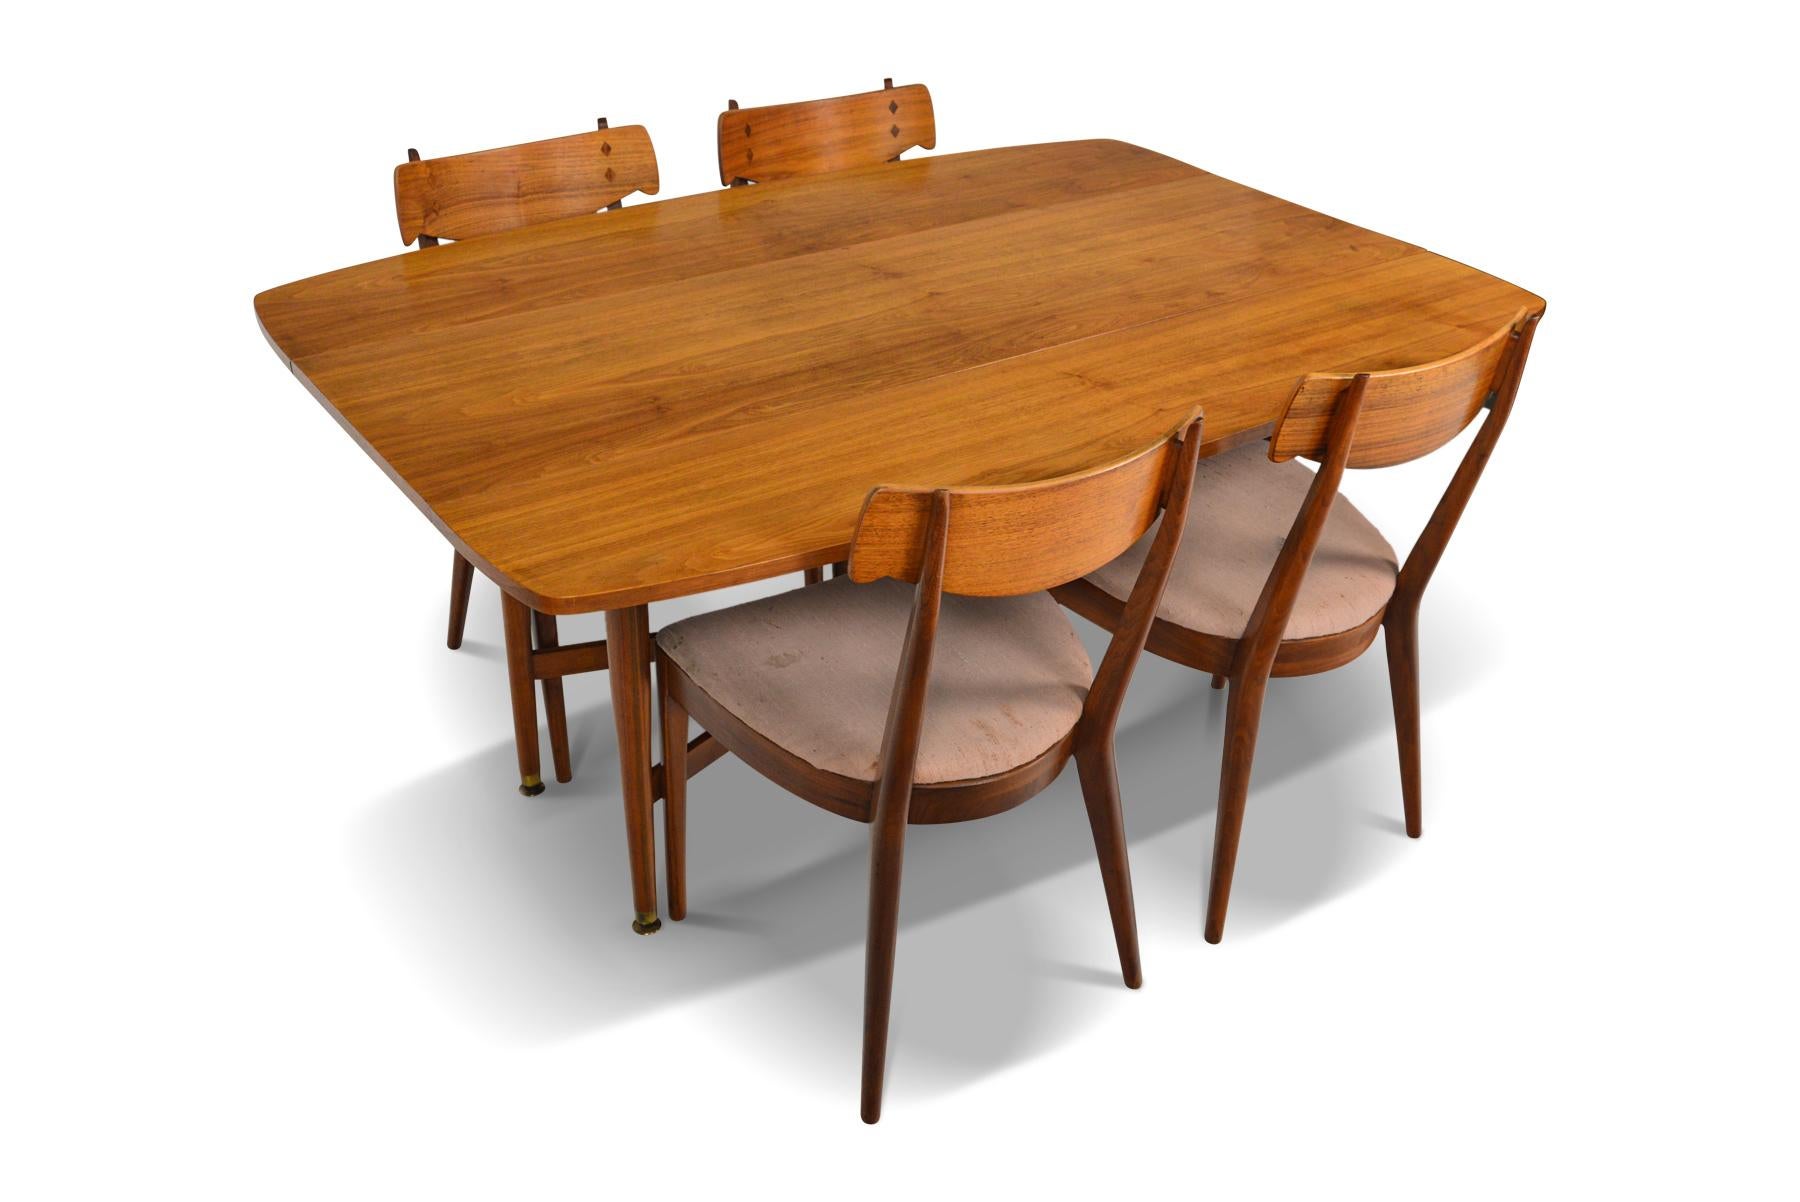 American Mid-Century Modern dining chairs and drop leaf tables from Drexel’s Declaration line. In excellent original condition. Price includes new upholstery.

Measurements (closed):
60? long x 17.5? wide x 28? tall
Expanded: 60? long x 42? wide